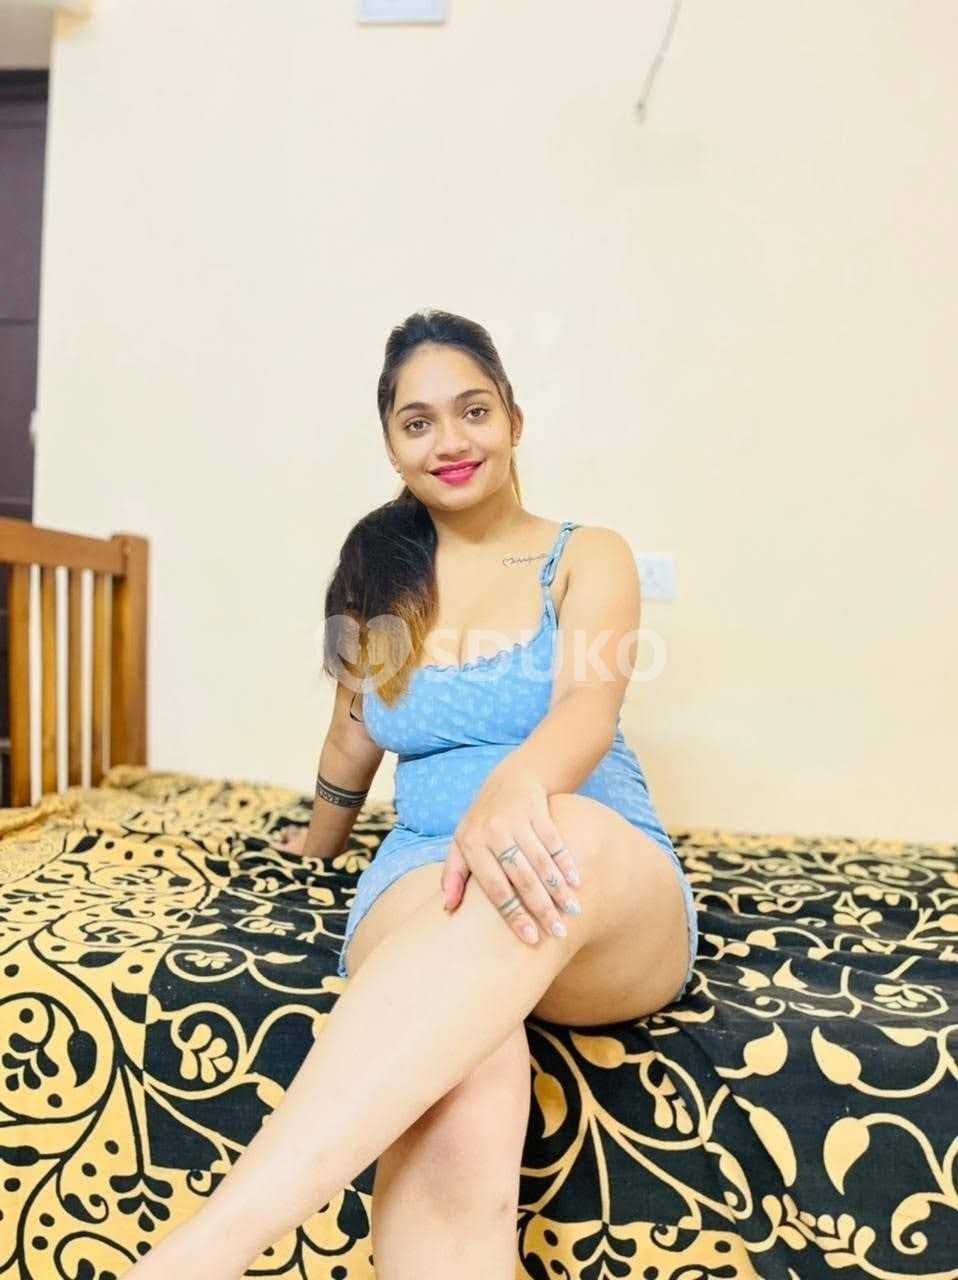 JP Nagar ✨✨✨Best call girl service in low price high profile call girls available call me anytime this number only